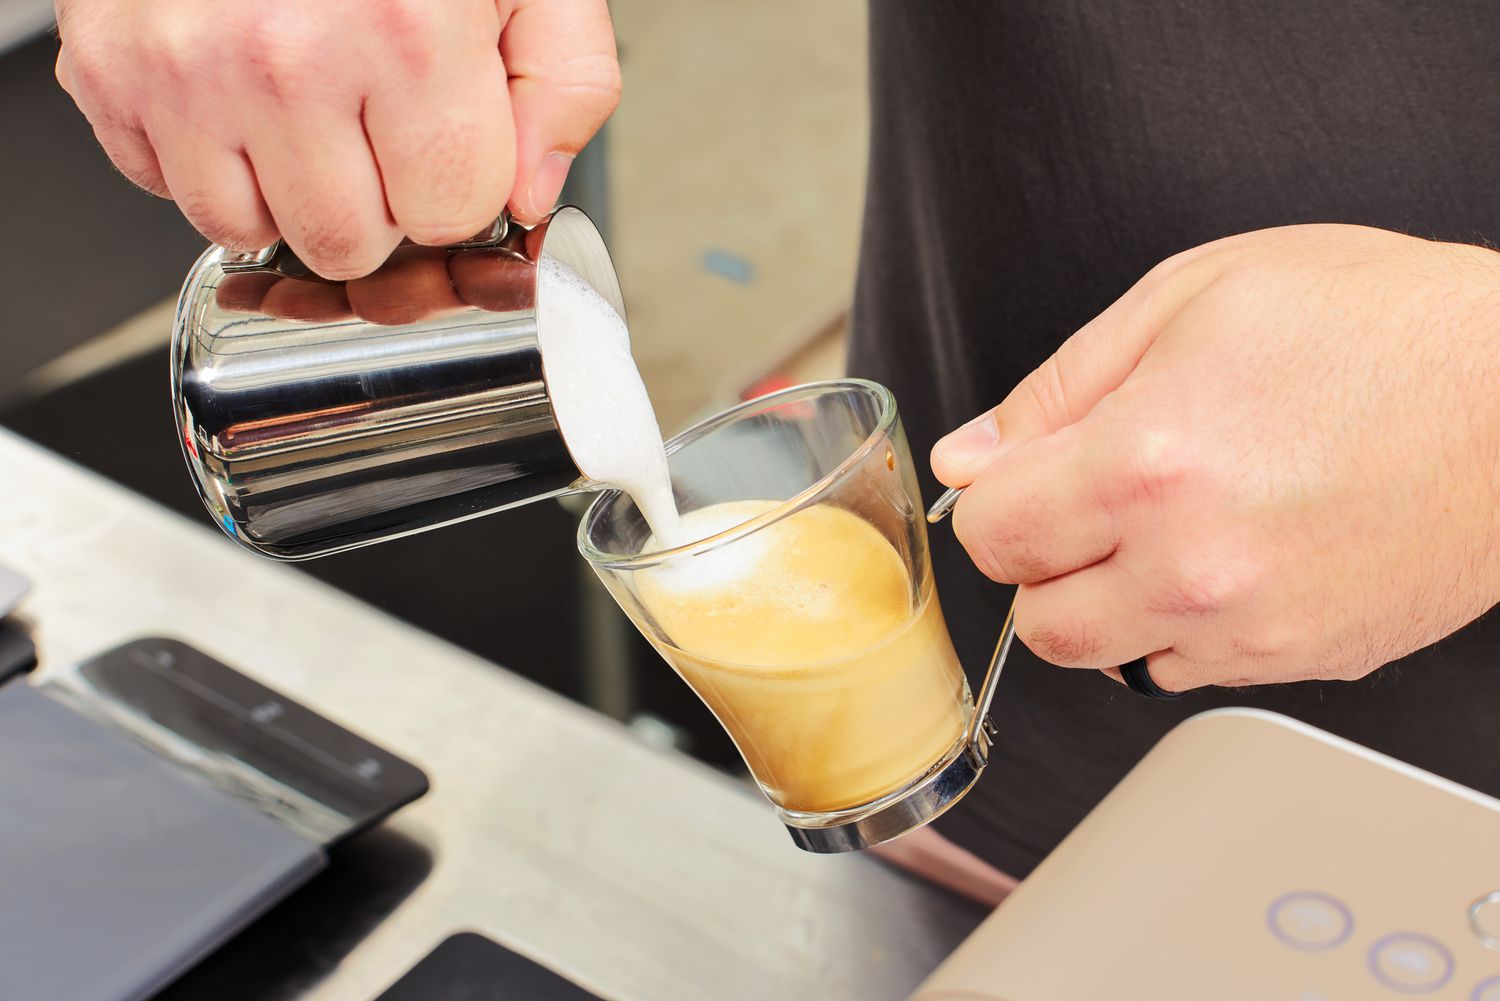 Frothed milk being poured into espresso brewed using the SMEG Medium Fully-Automatic Coffee Machine.